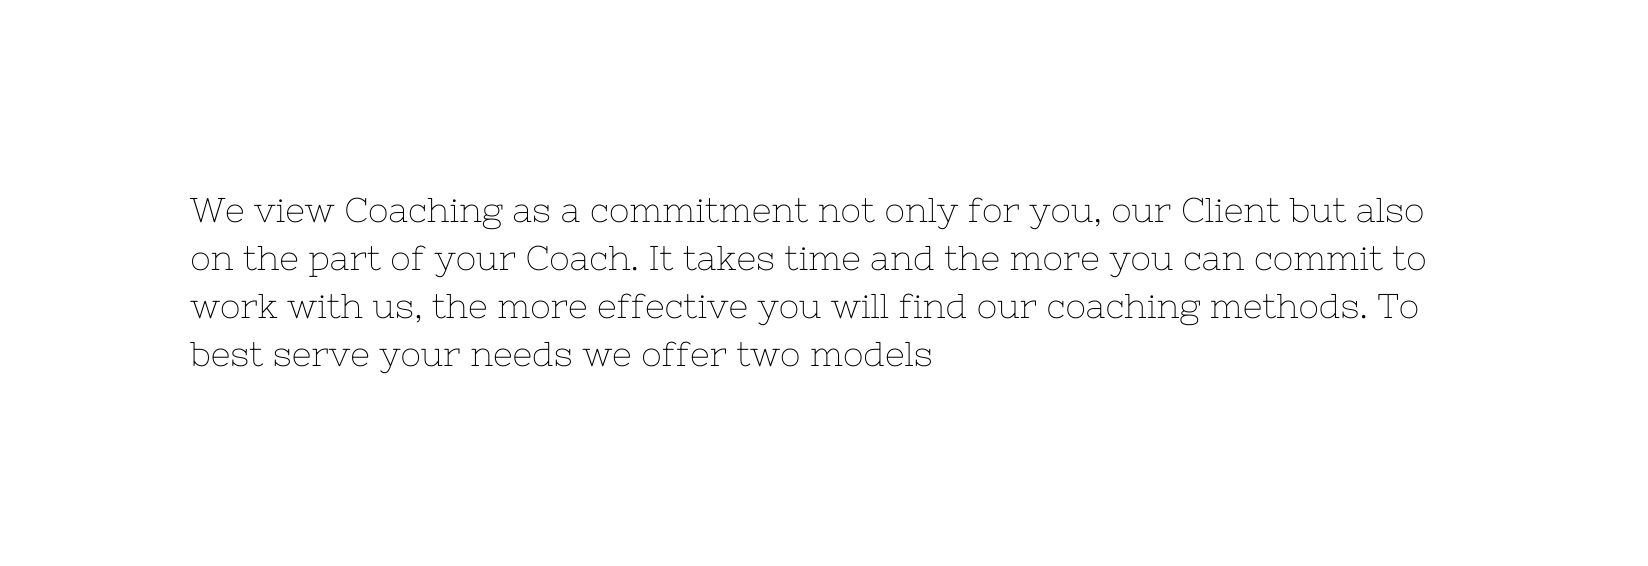 We view Coaching as a commitment not only for you our Client but also on the part of your Coach It takes time and the more you can commit to work with us the more effective you will find our coaching methods To best serve your needs we offer two models